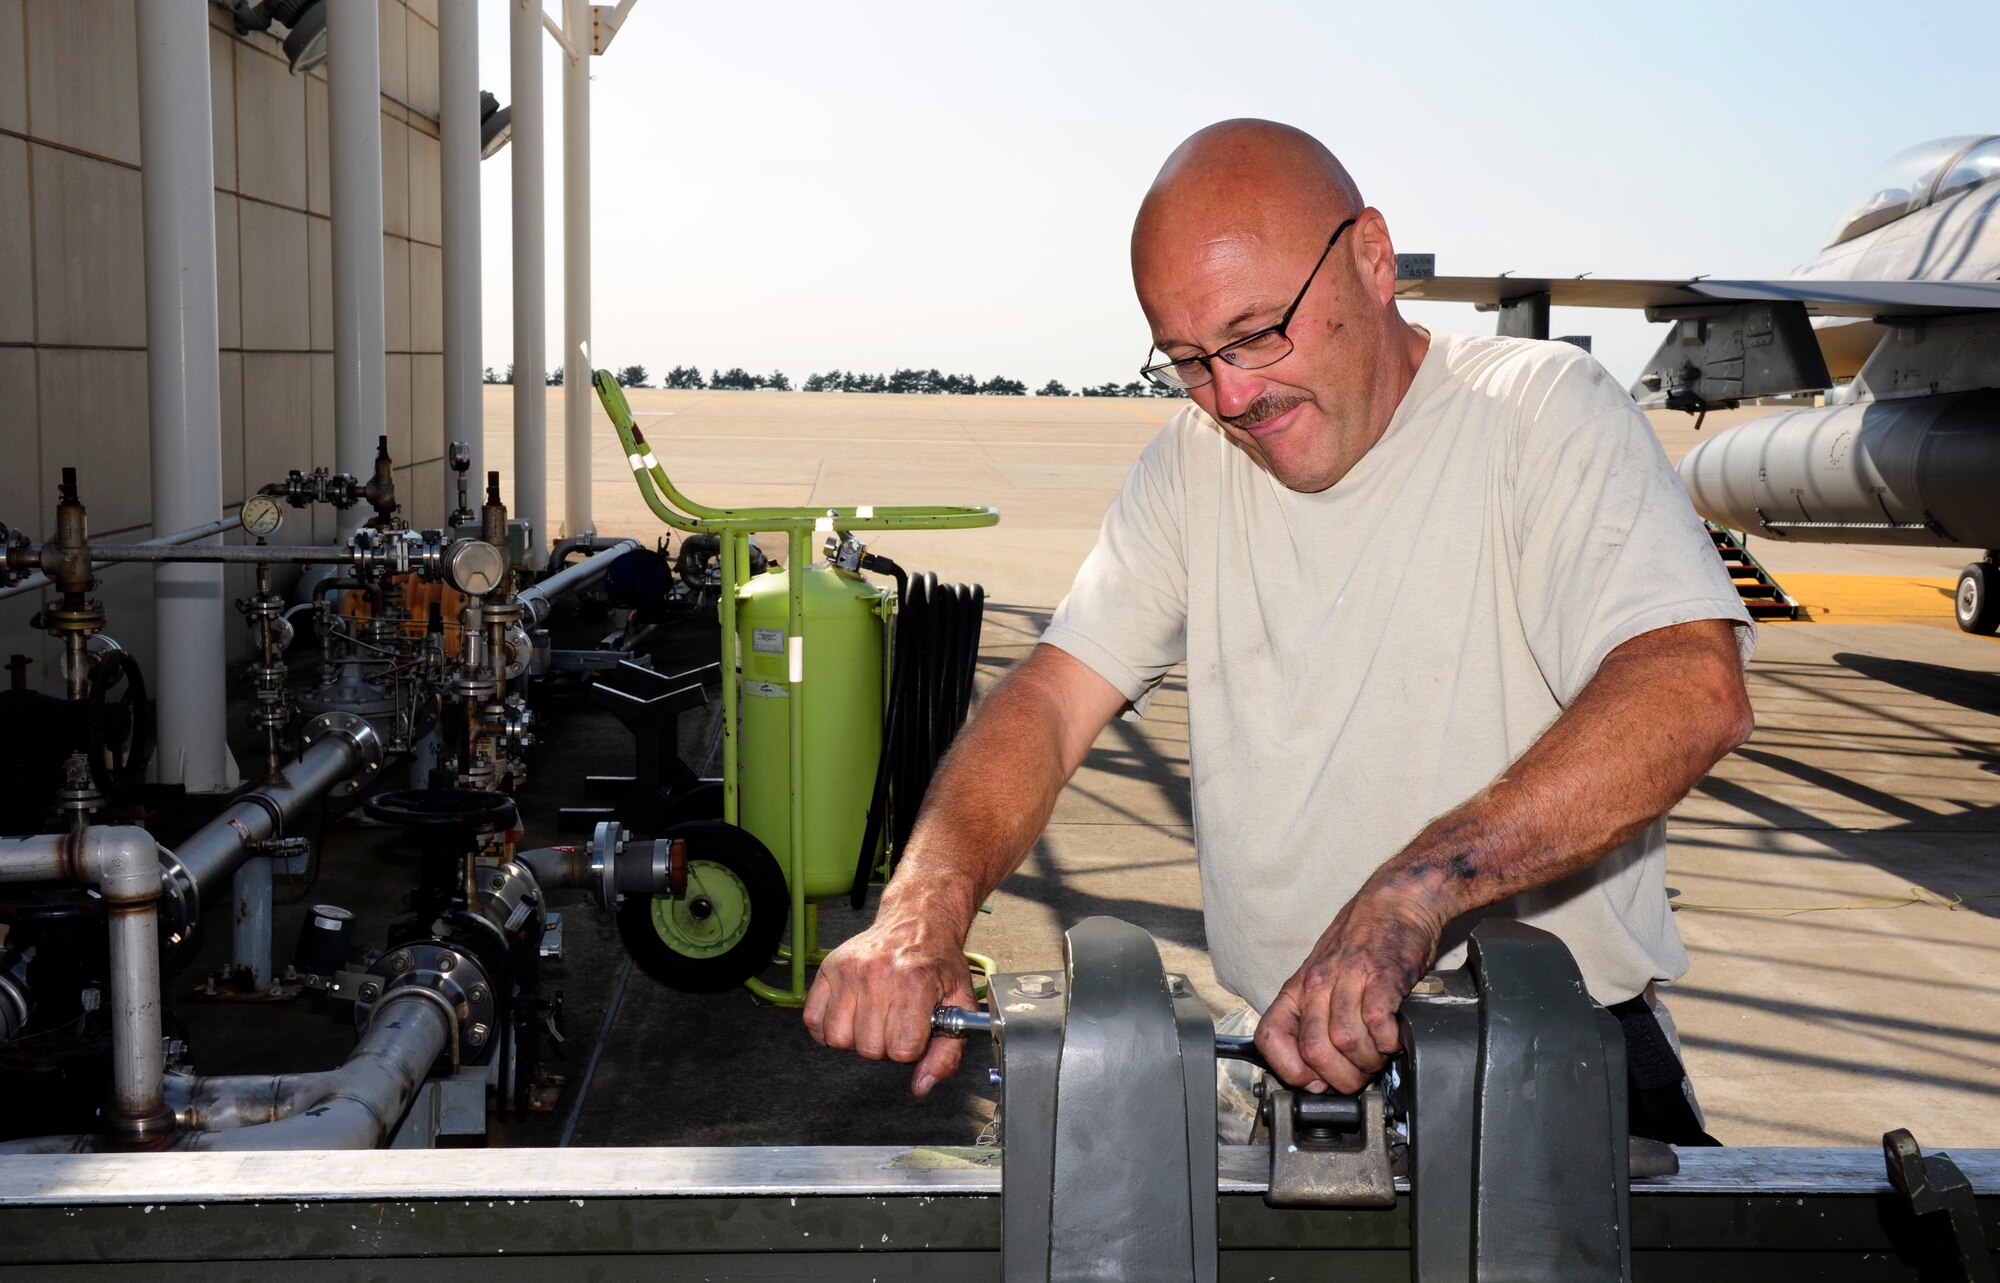 U.S. Air Force Senior Master Sgt. Paul Miscavage, 134th Expeditionary Fighter Squadron propulsion superintendent, Vermont Air National Guard, works on an engine removal and installation at Kunsan Air Base, Republic of Korea, Oct. 6, 2015. The 134th EFS was redeployed from Kadena Air Base, Japan to Kunsan AB as part of a theater security package. The 134th Expeditionary Fighter Squadron deployed to Kunsan as part of a rotational theater security package to solidify U.S. relationships with international partners. (U.S. Air Force photo by Staff Sgt. Nick Wilson/Released)